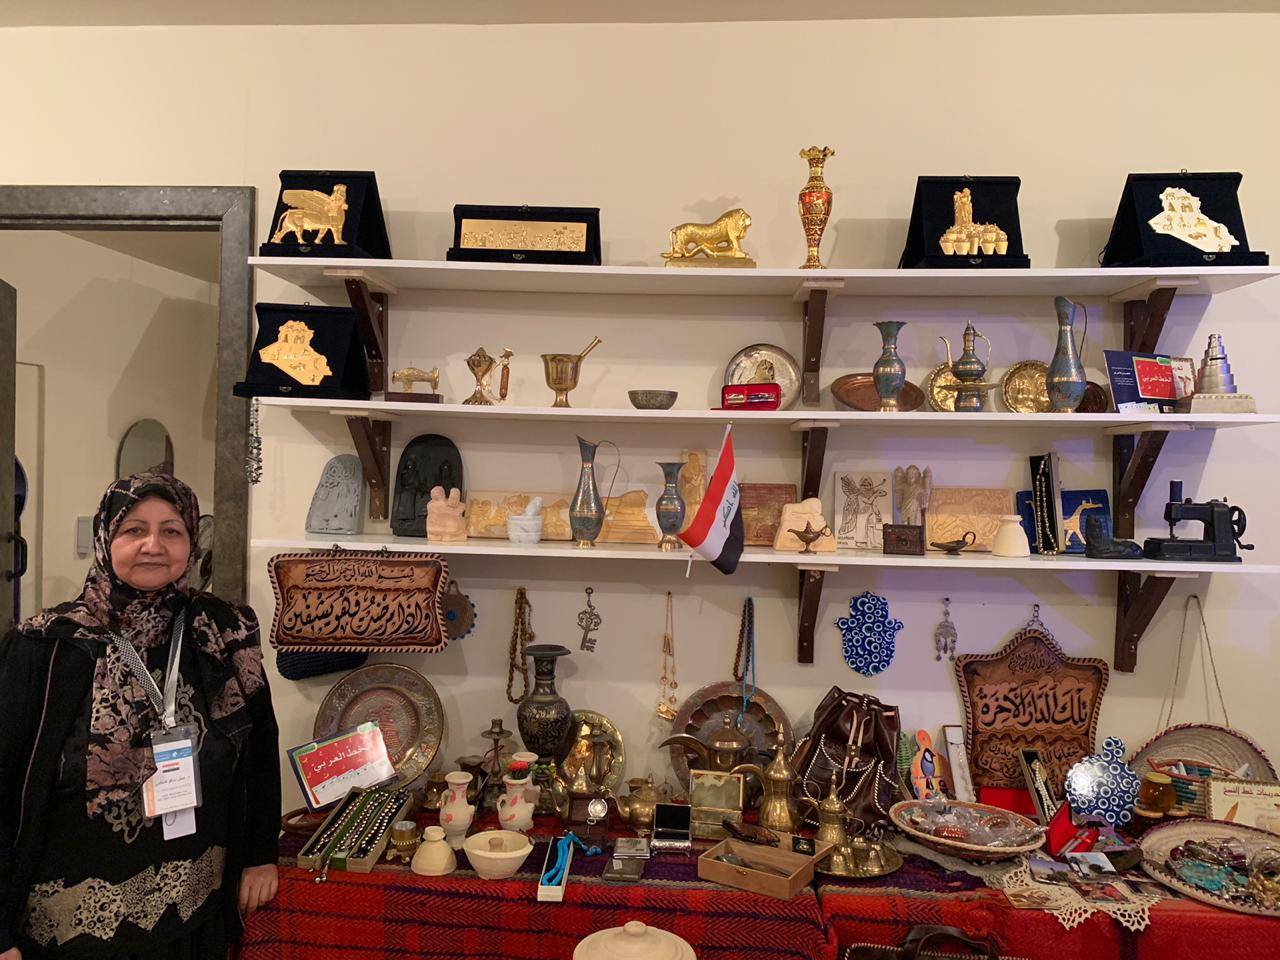 Dr. Iman Salim Al-Khafaji, chairperson of Al-Mashkat Cultural Association of Iraq and Al-Khayal Center for Iraqi Businesswomen, is leading the 23-member Iraqi delegation at the 13th edition of the Souk Okaz festival in Taif. — 